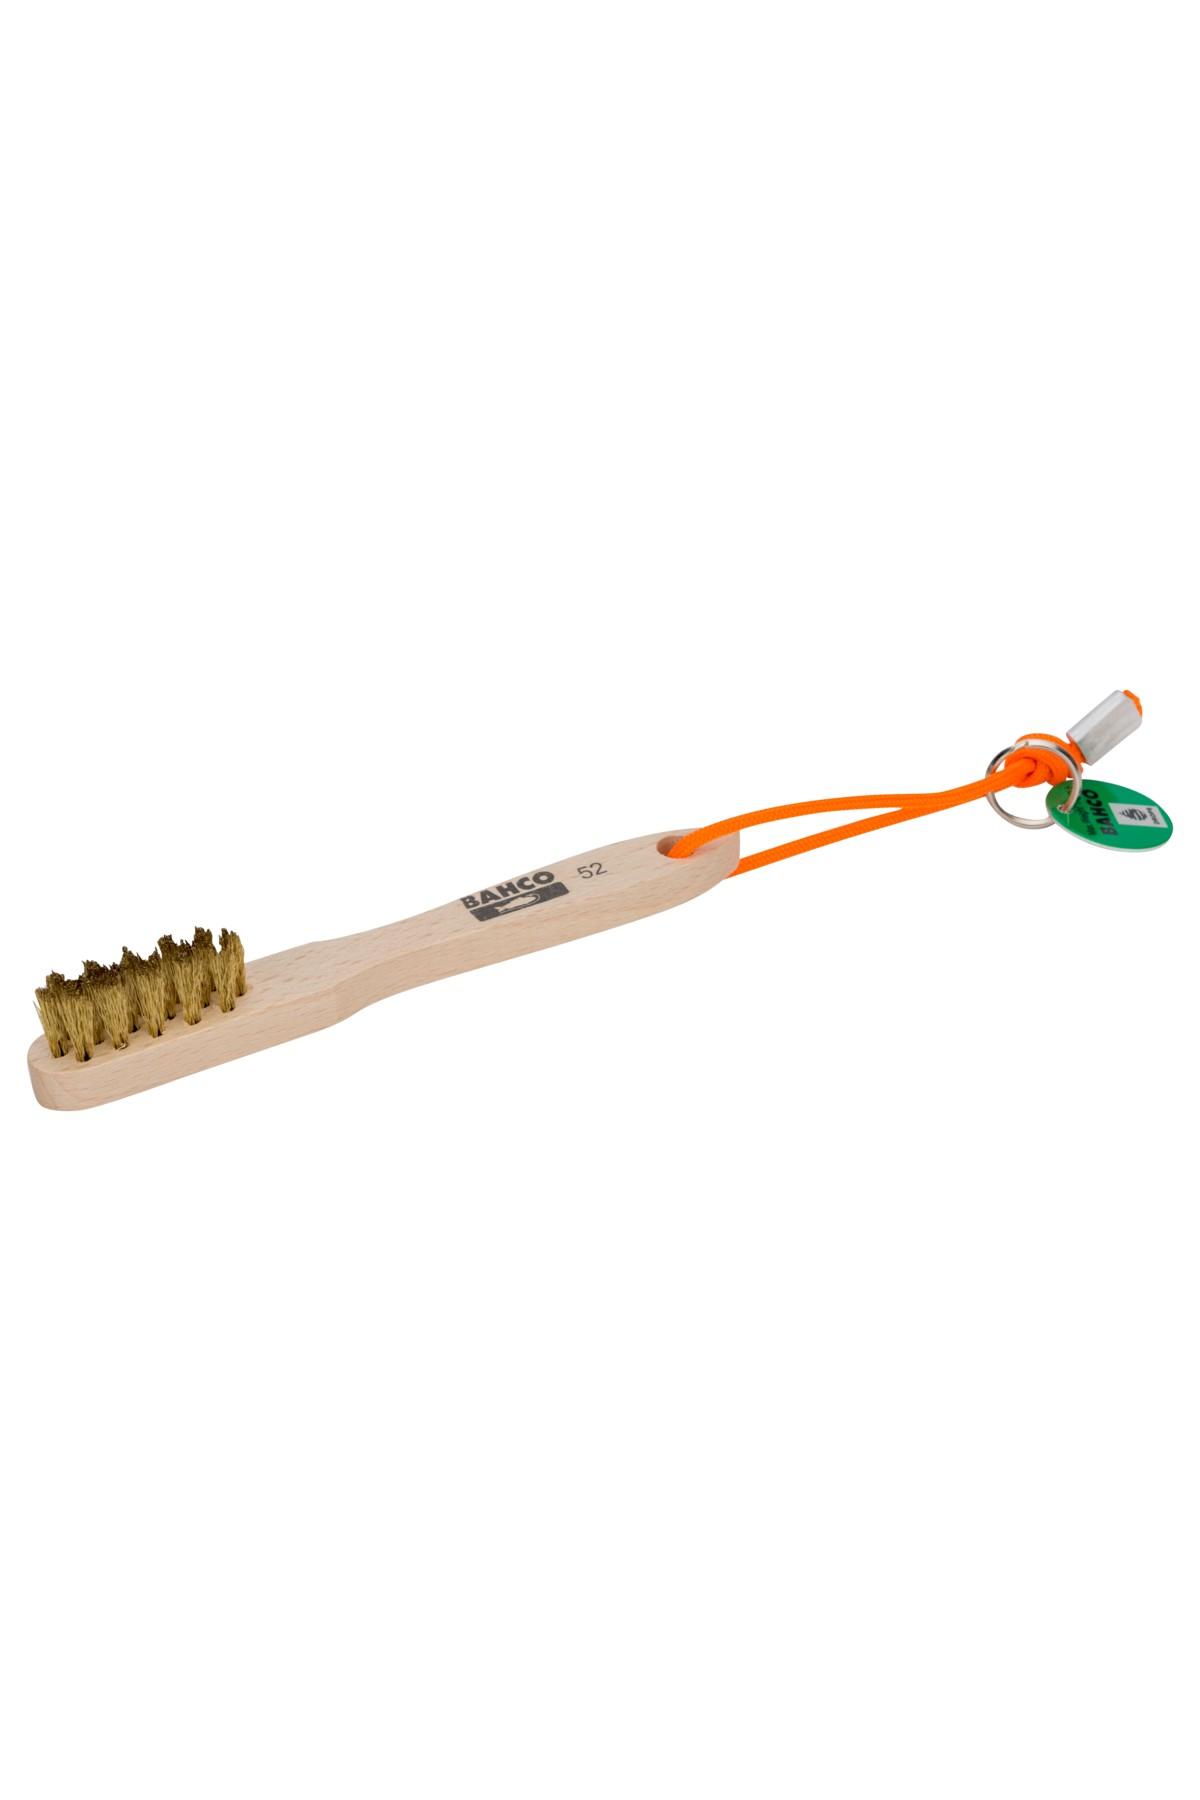 Steel brush with wooden handle height-secured